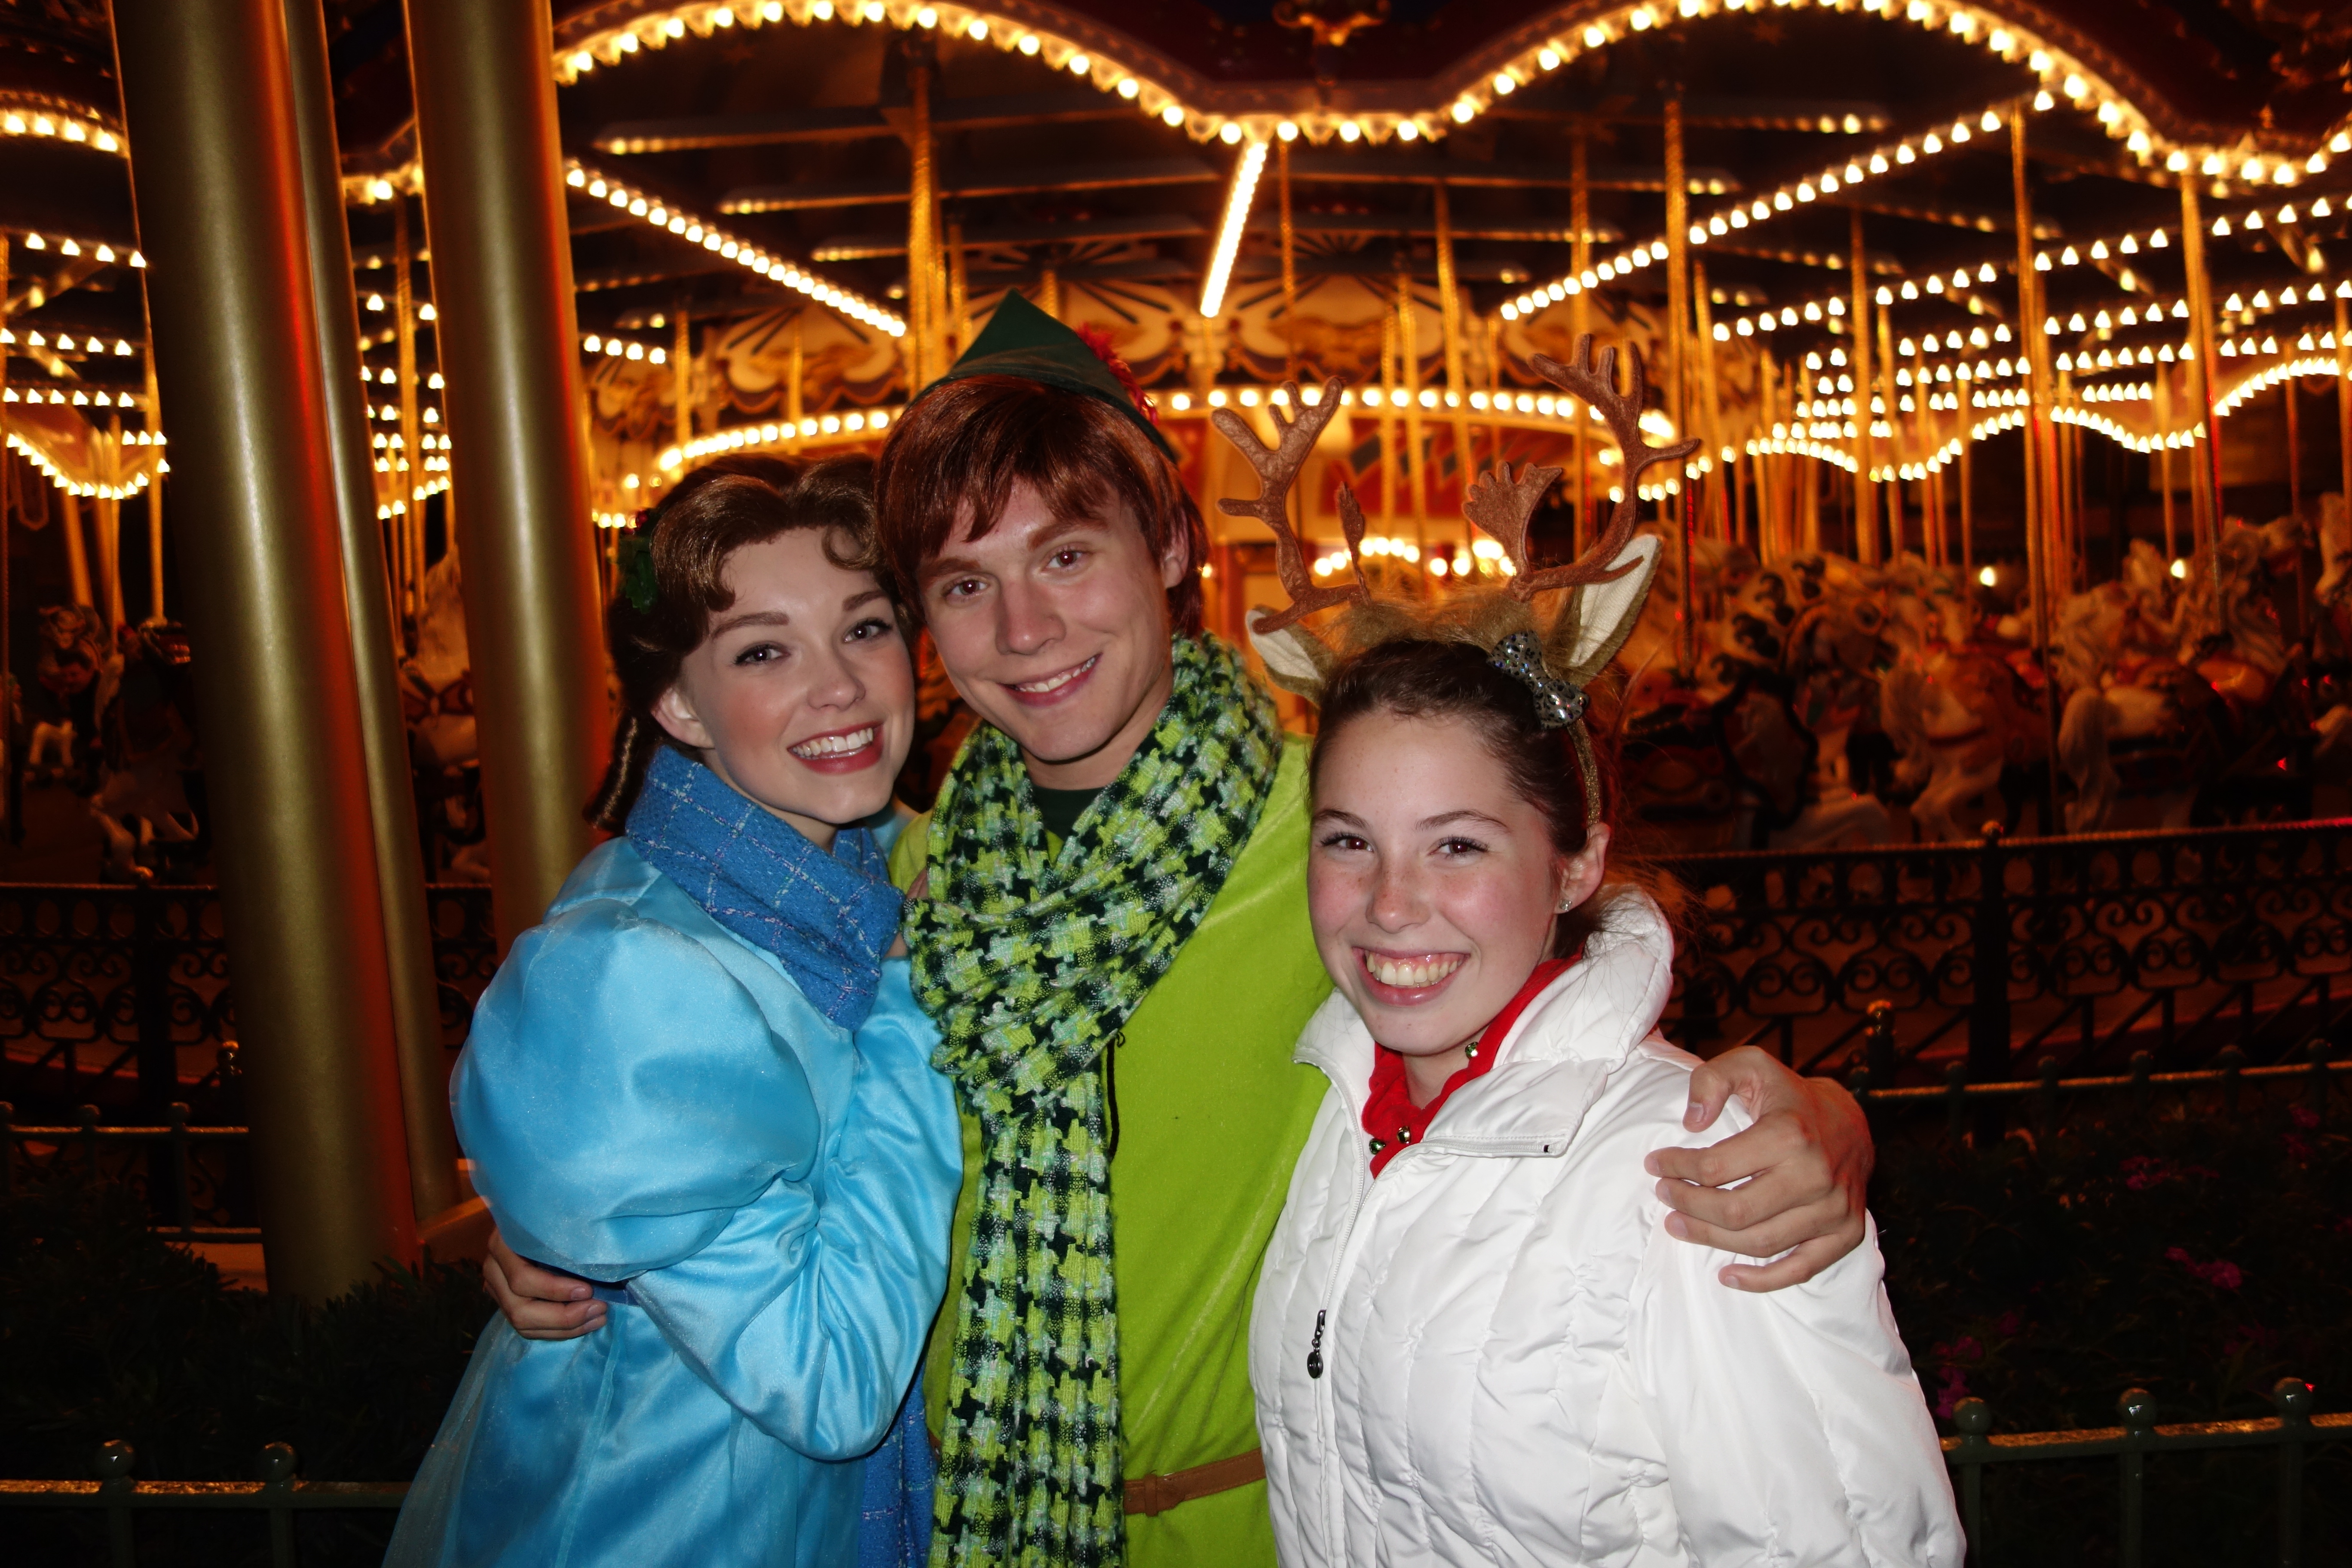 Peter Pan & Wendy Darling at Mickey's Very Merry Christmas Party 2012